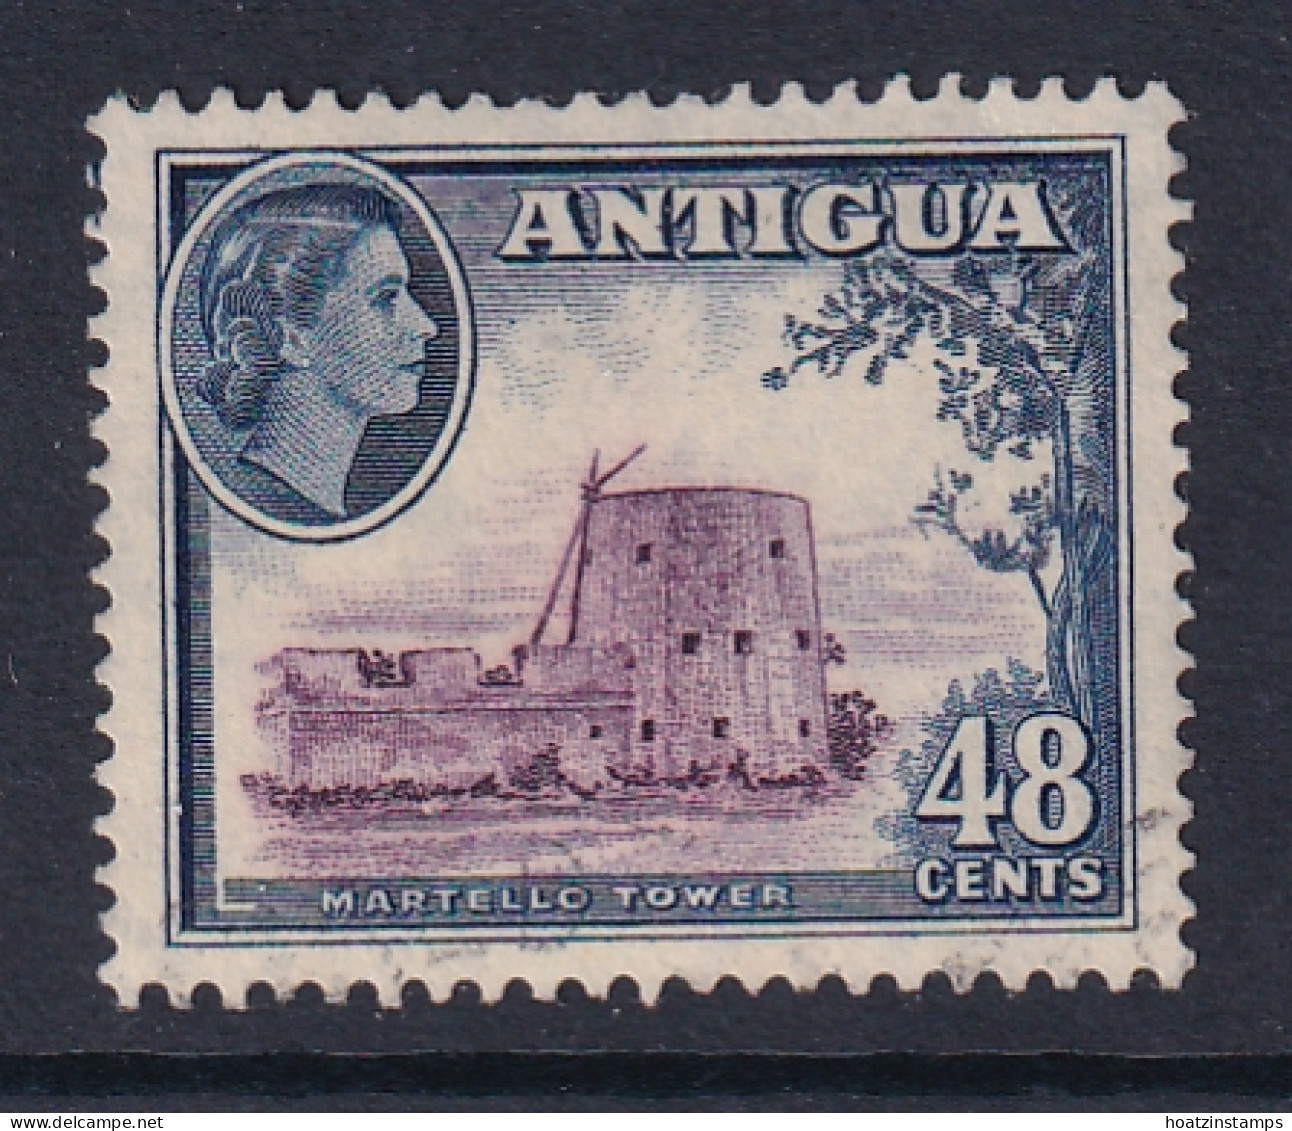 Antigua: 1953/62   QE II - Pictorial     SG130    48c     Used - 1858-1960 Crown Colony